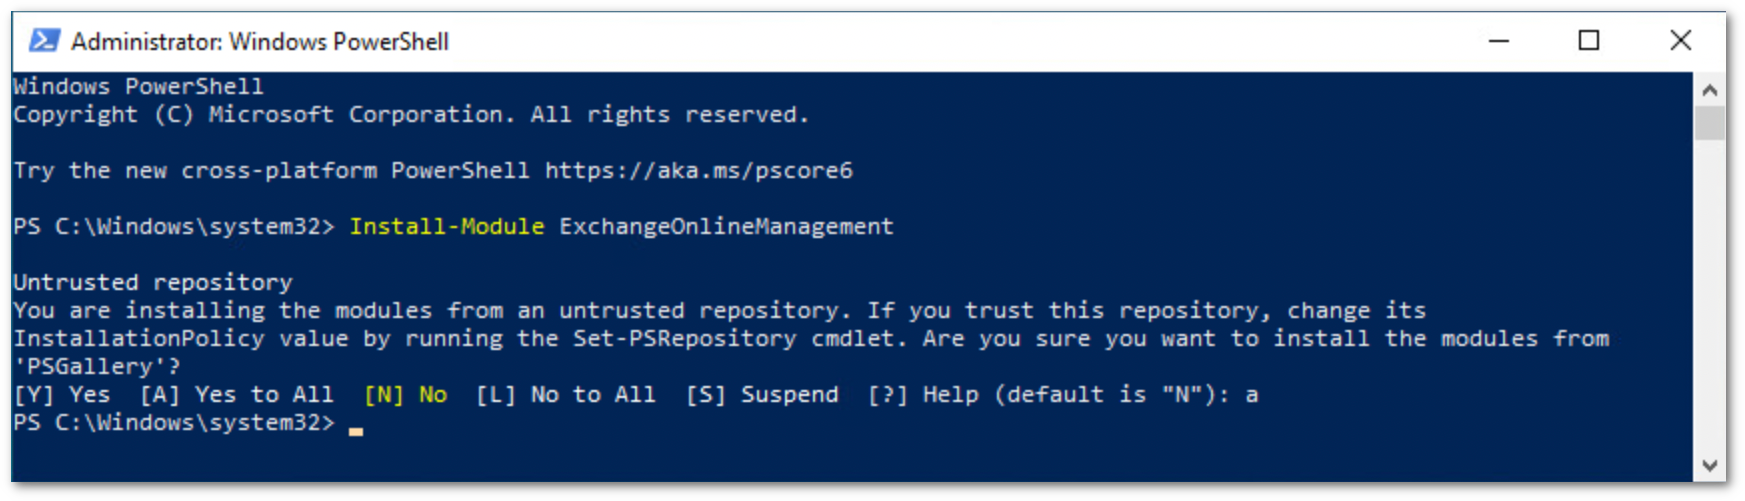 Run the install-module command in PowerShell